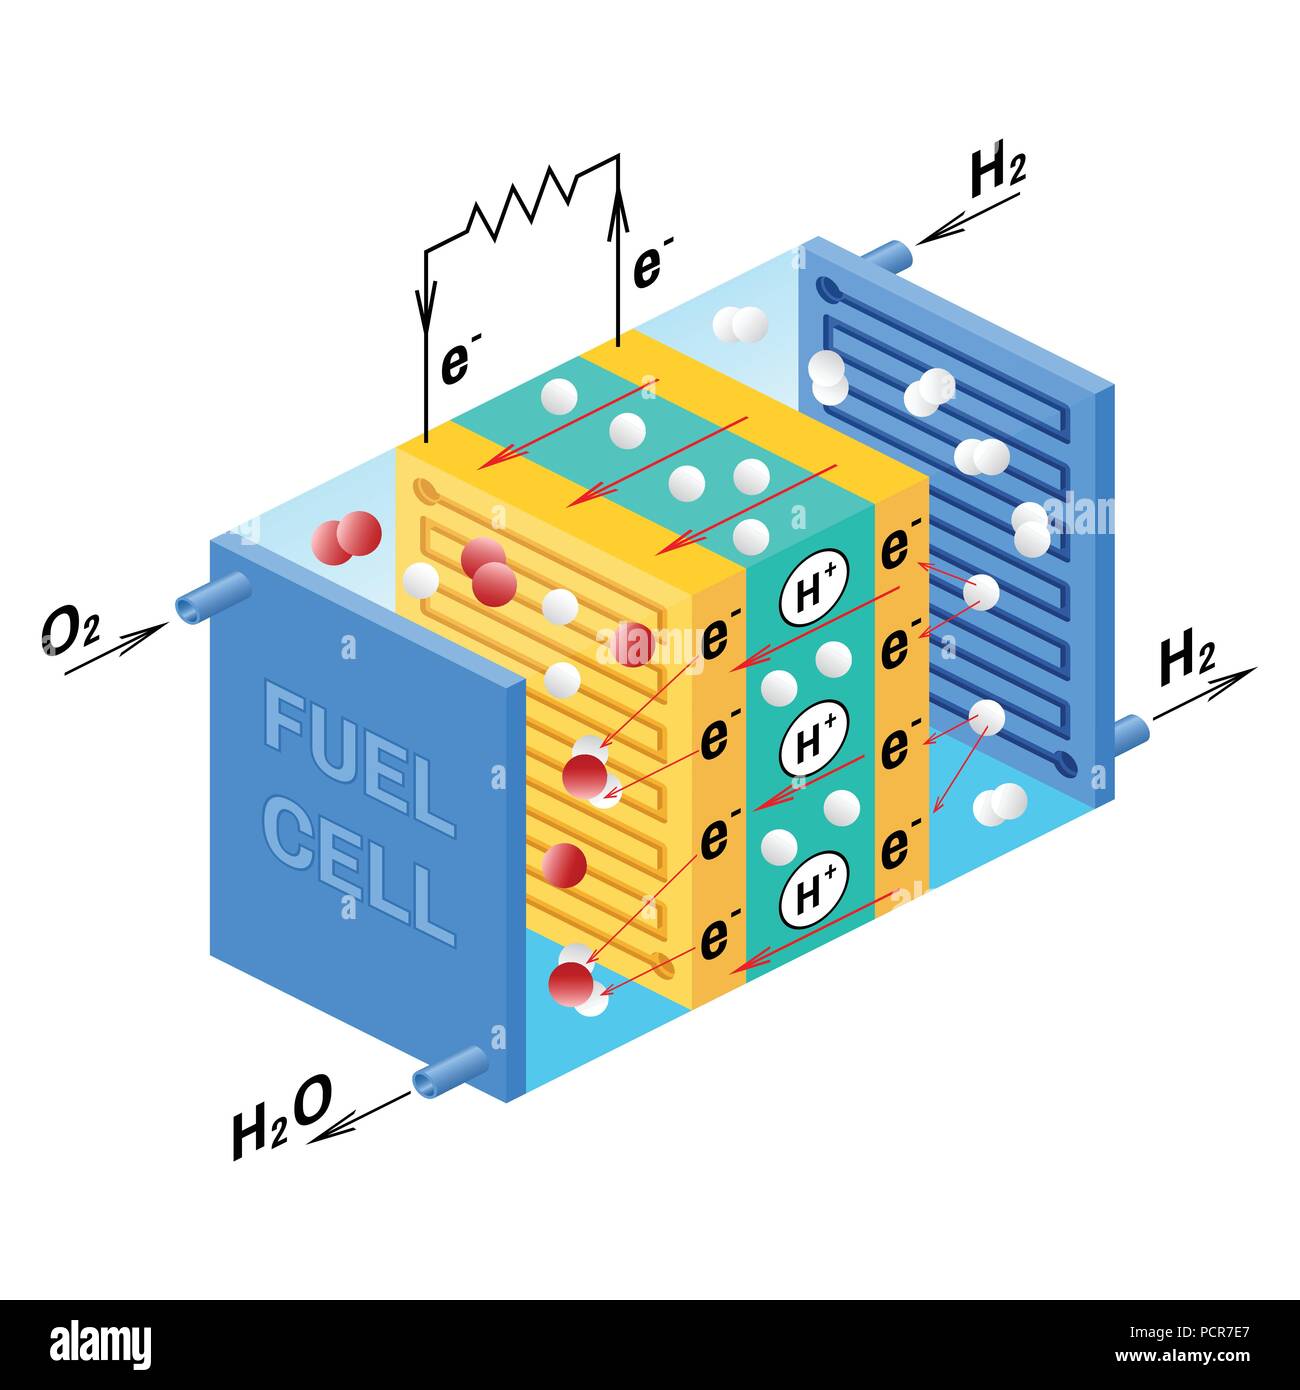 Fuel cell diagram. Vector. Device that converts chemical potential energy into electrical energy. A PEM, Proton Exchange Membrane cell uses hydrogen gas and oxygen gas as fuel. Stock Vector